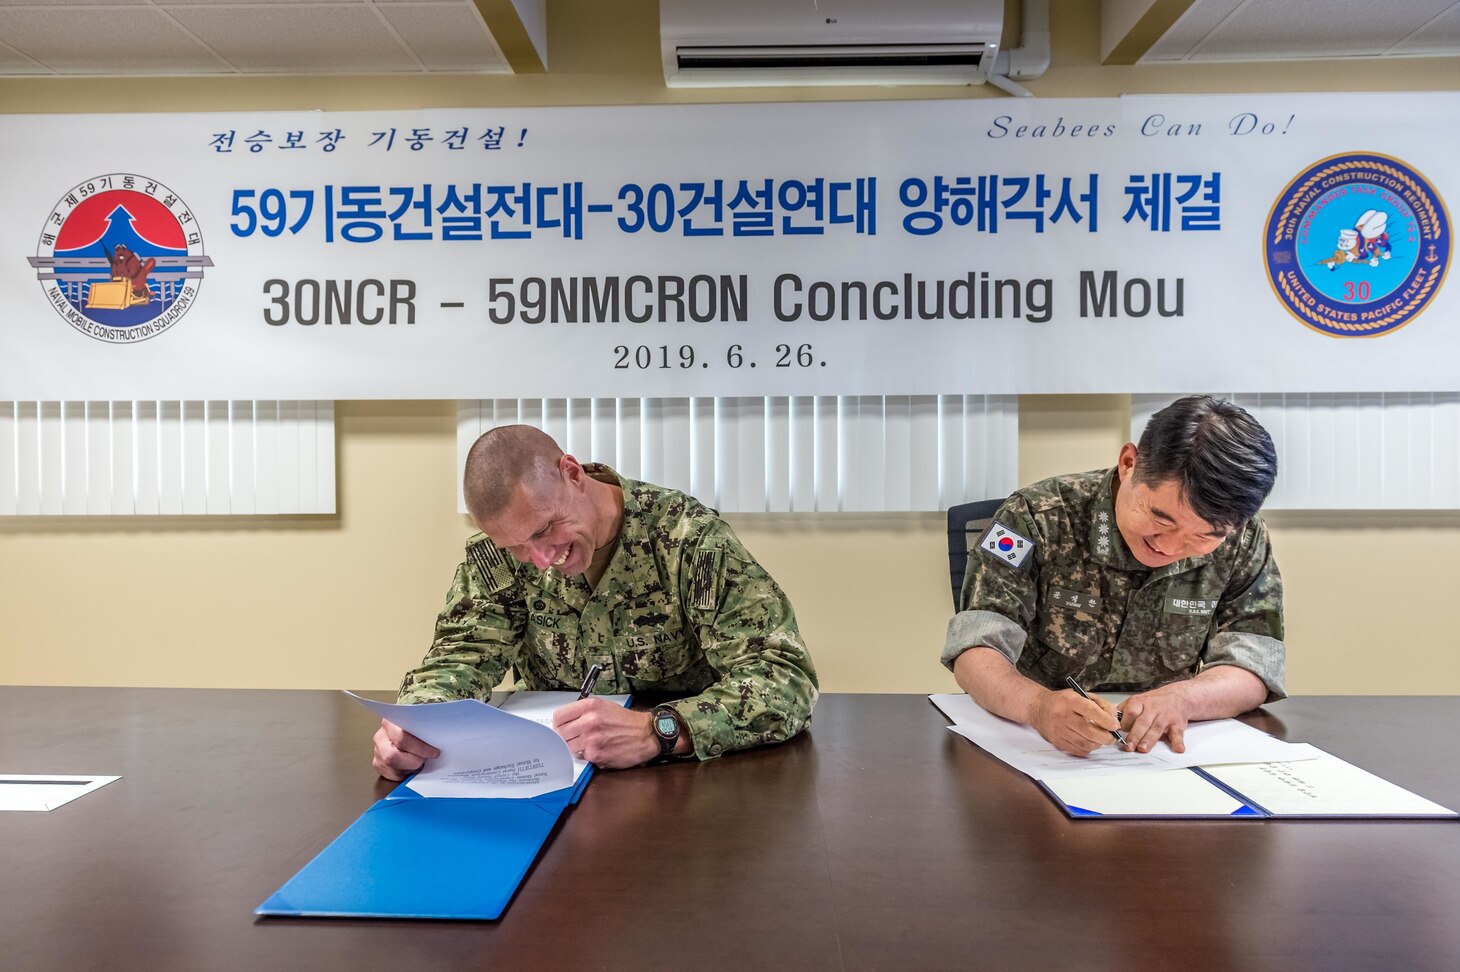 SANTA RITA, Guam (June 26, 2019) Capt. Steve Stasick, Commodore 30th Naval Construction Regiment (30 NCR) and Republic of Korea Navy Capt. Seok Han Yoon, Commodore Naval Mobile Construction Squadron (NMCRON) 59, sign a memorandum of understanding between the two units. The MOU is designed to strengthen the naval engineering capabilities between 30 NCR and NMCRON 59, leading to a tighter operational relationship that will prepare both units for any future contingency